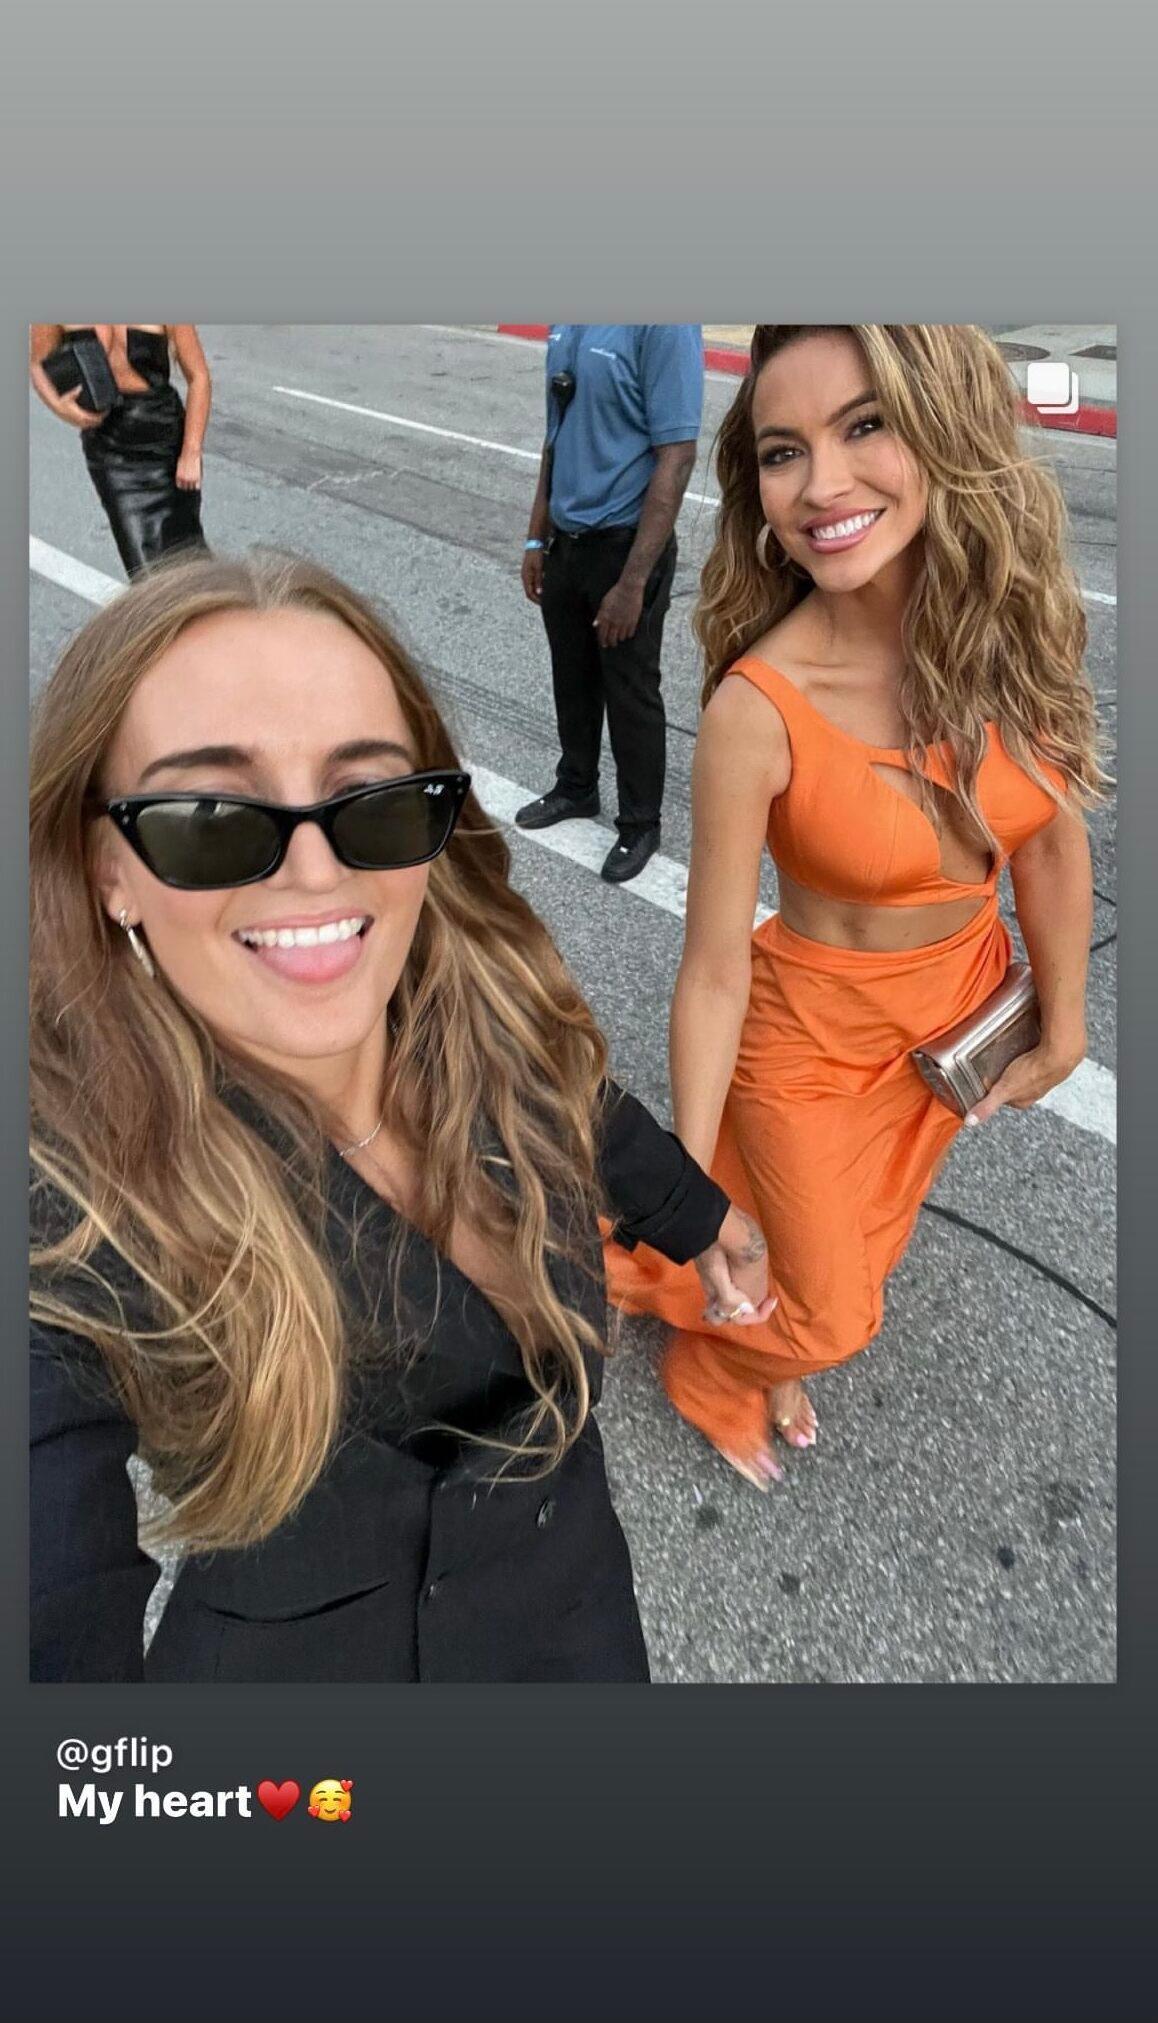 Chrishell Stause's post on her Instagram story